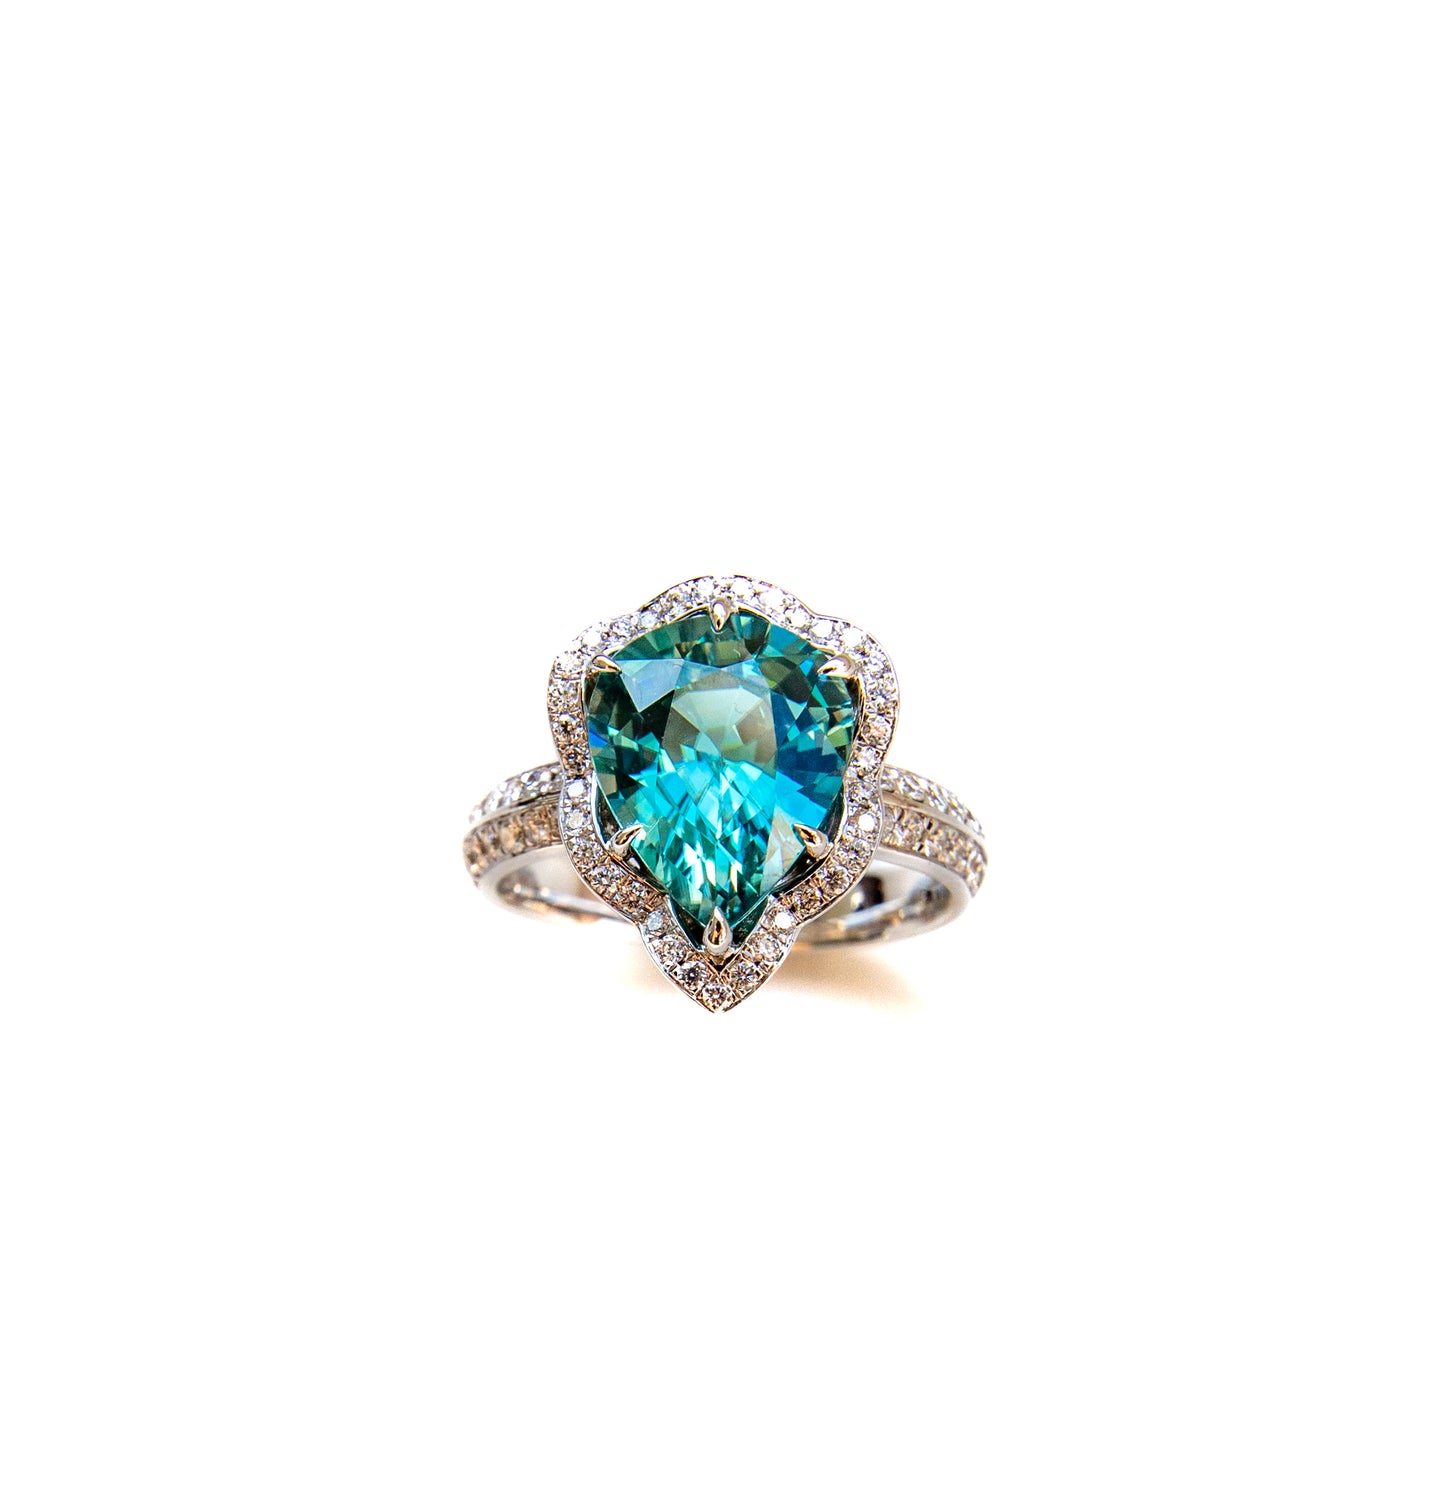 Natural Zircon and diamond cocktail ring